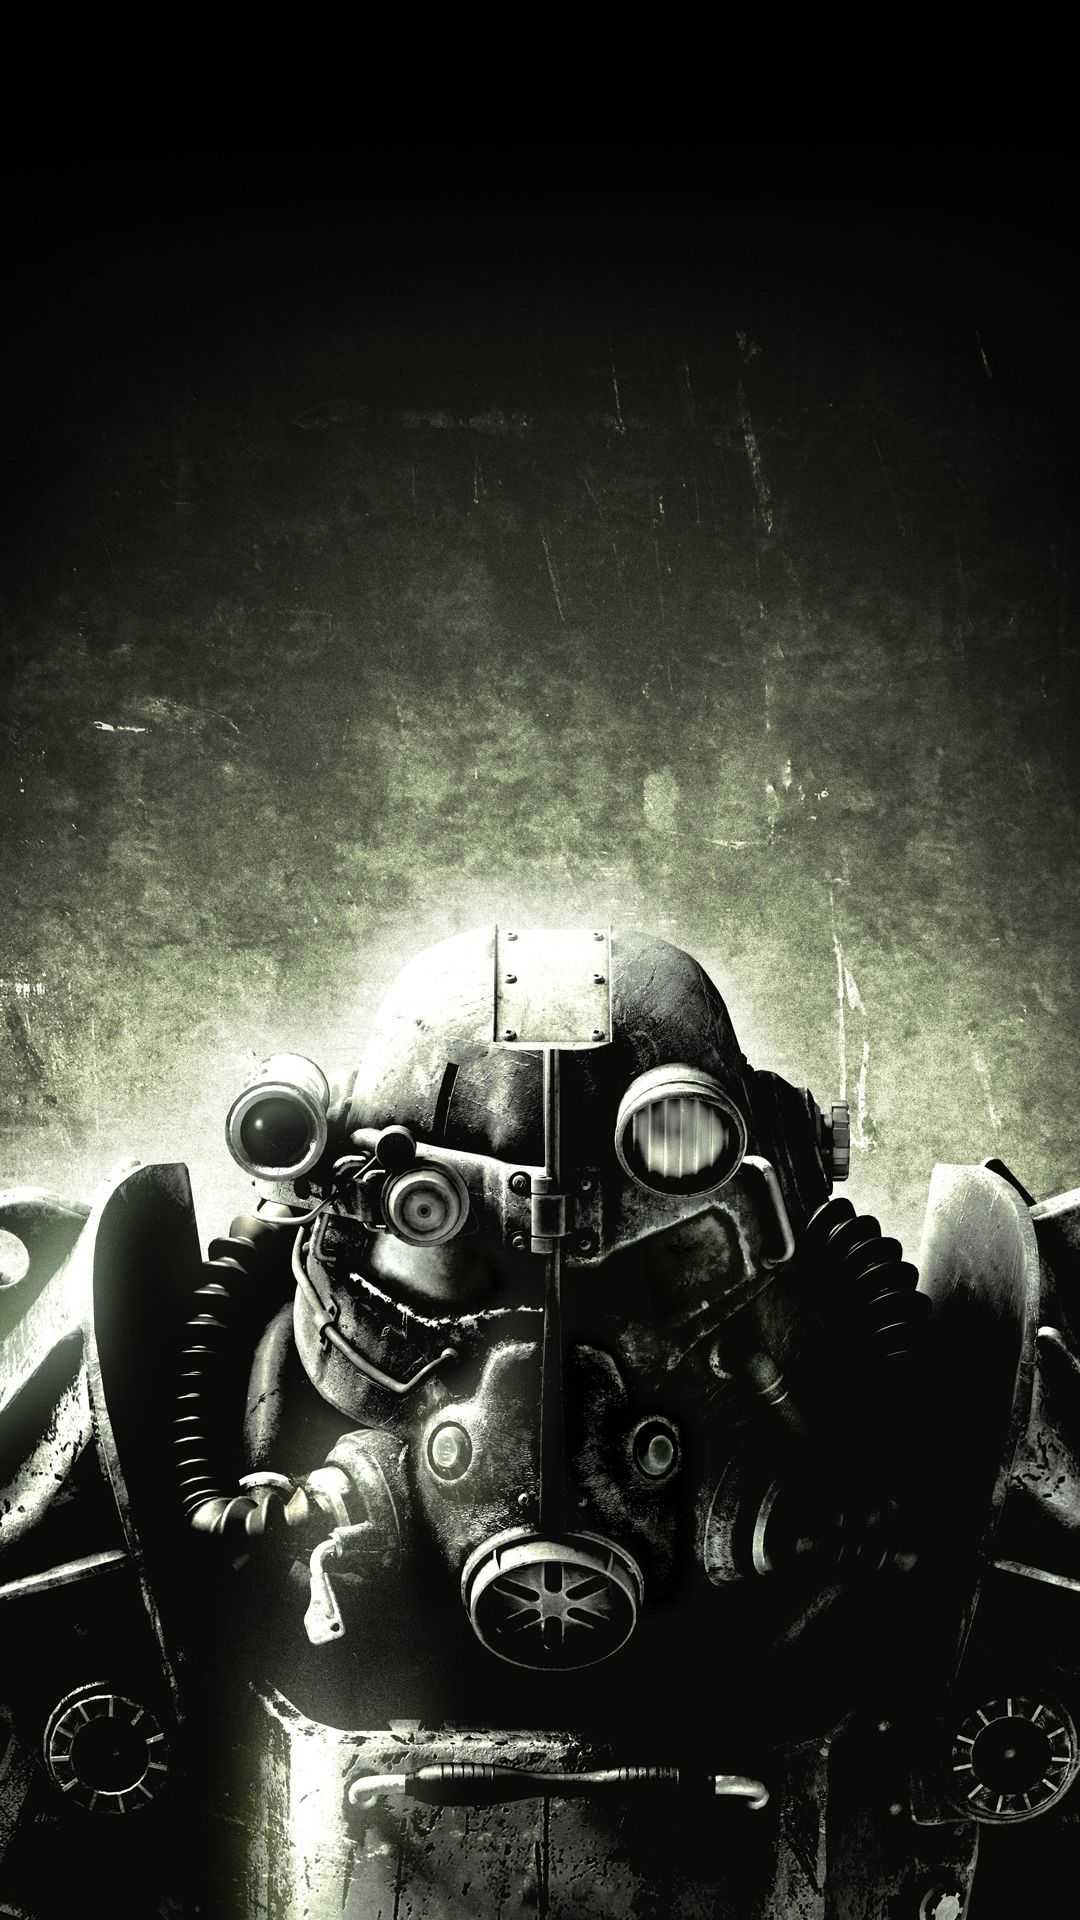 Fallout 4 Synth Wallpapers